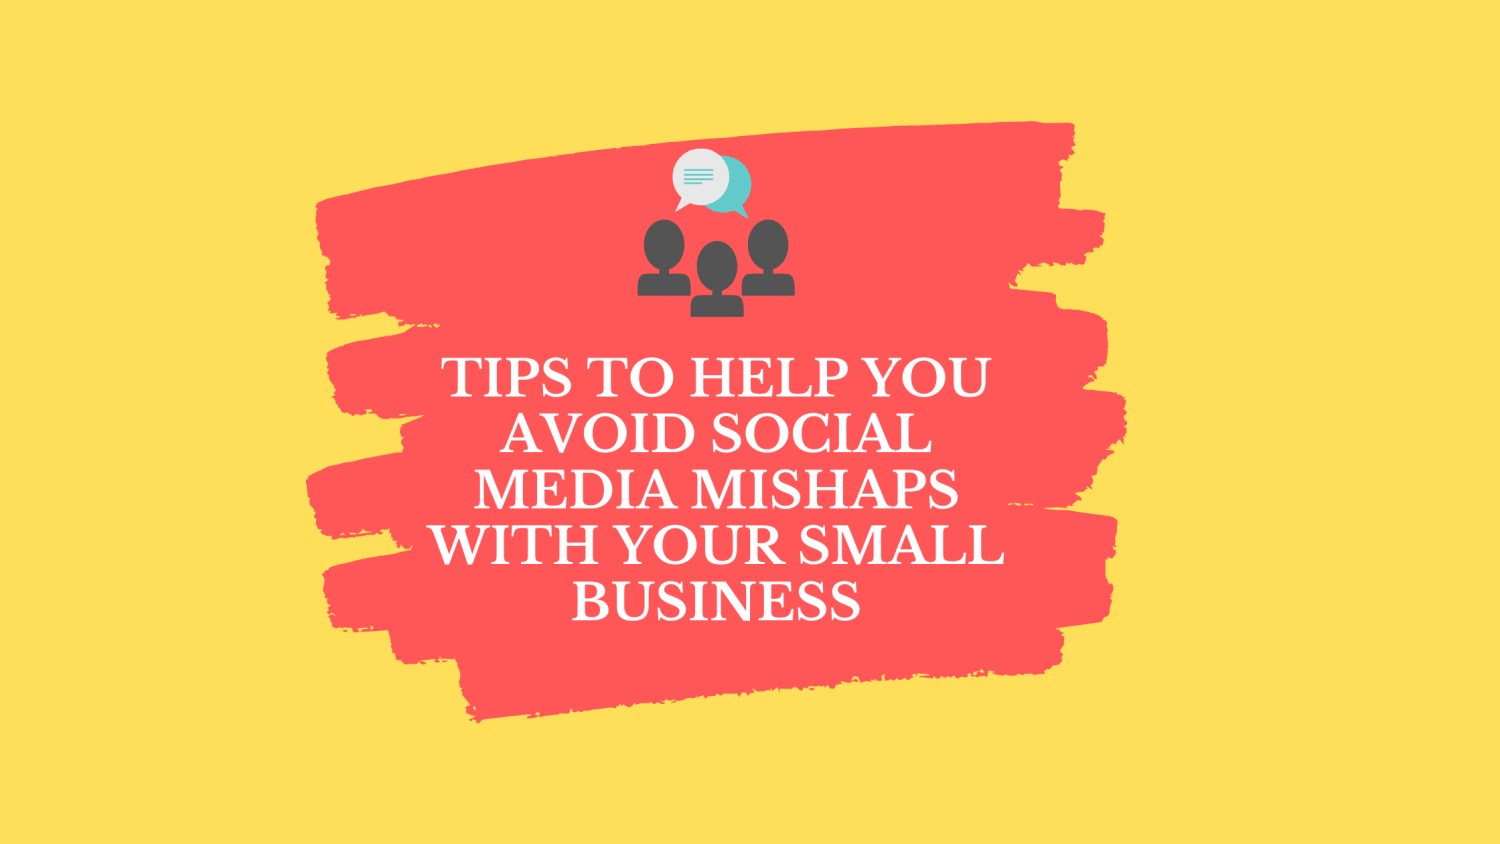 Tips to Help You Avoid Social Media Mishaps with Your Small Business